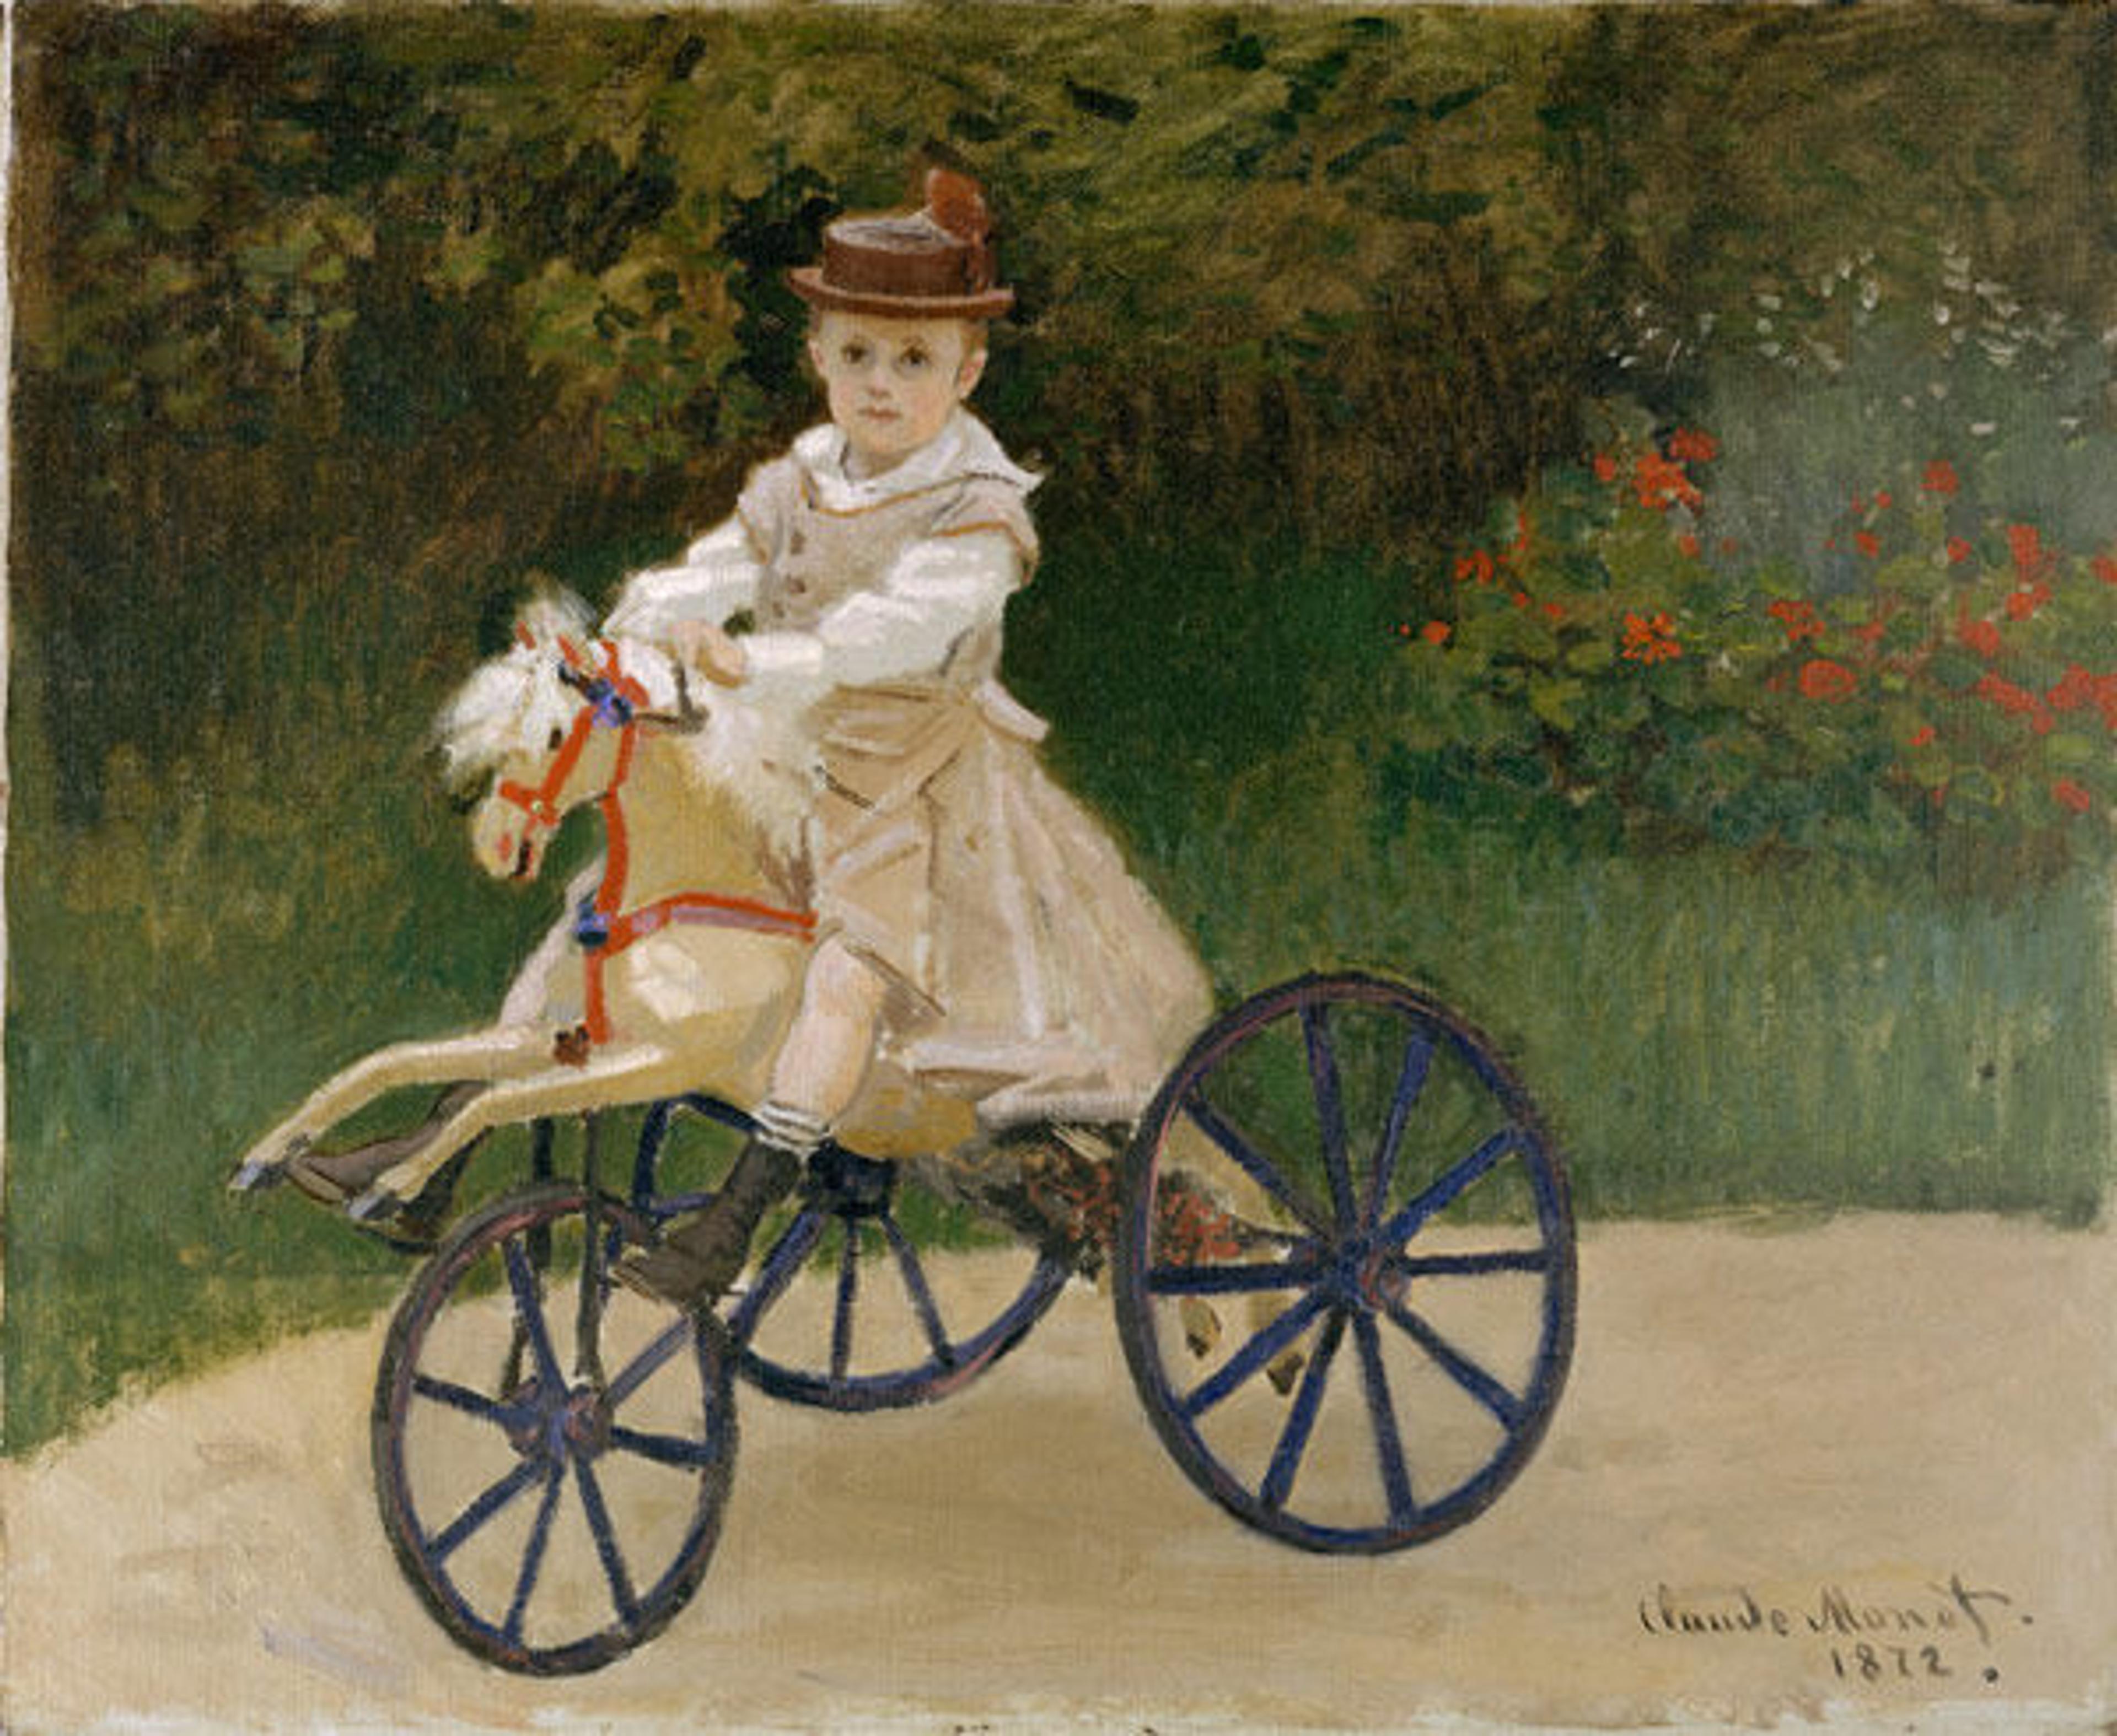 Claude Monet (French, 1840–1926). Jean Monet (1867–1913) on His Hobby Horse, 1872. Oil on canvas; 23 7/8 x 29 1/4 in. (60.6 x 74.3 cm). The Metropolitan Museum of Art, New York, Gift of Sara Lee Corporation, 2000 (2000.195)